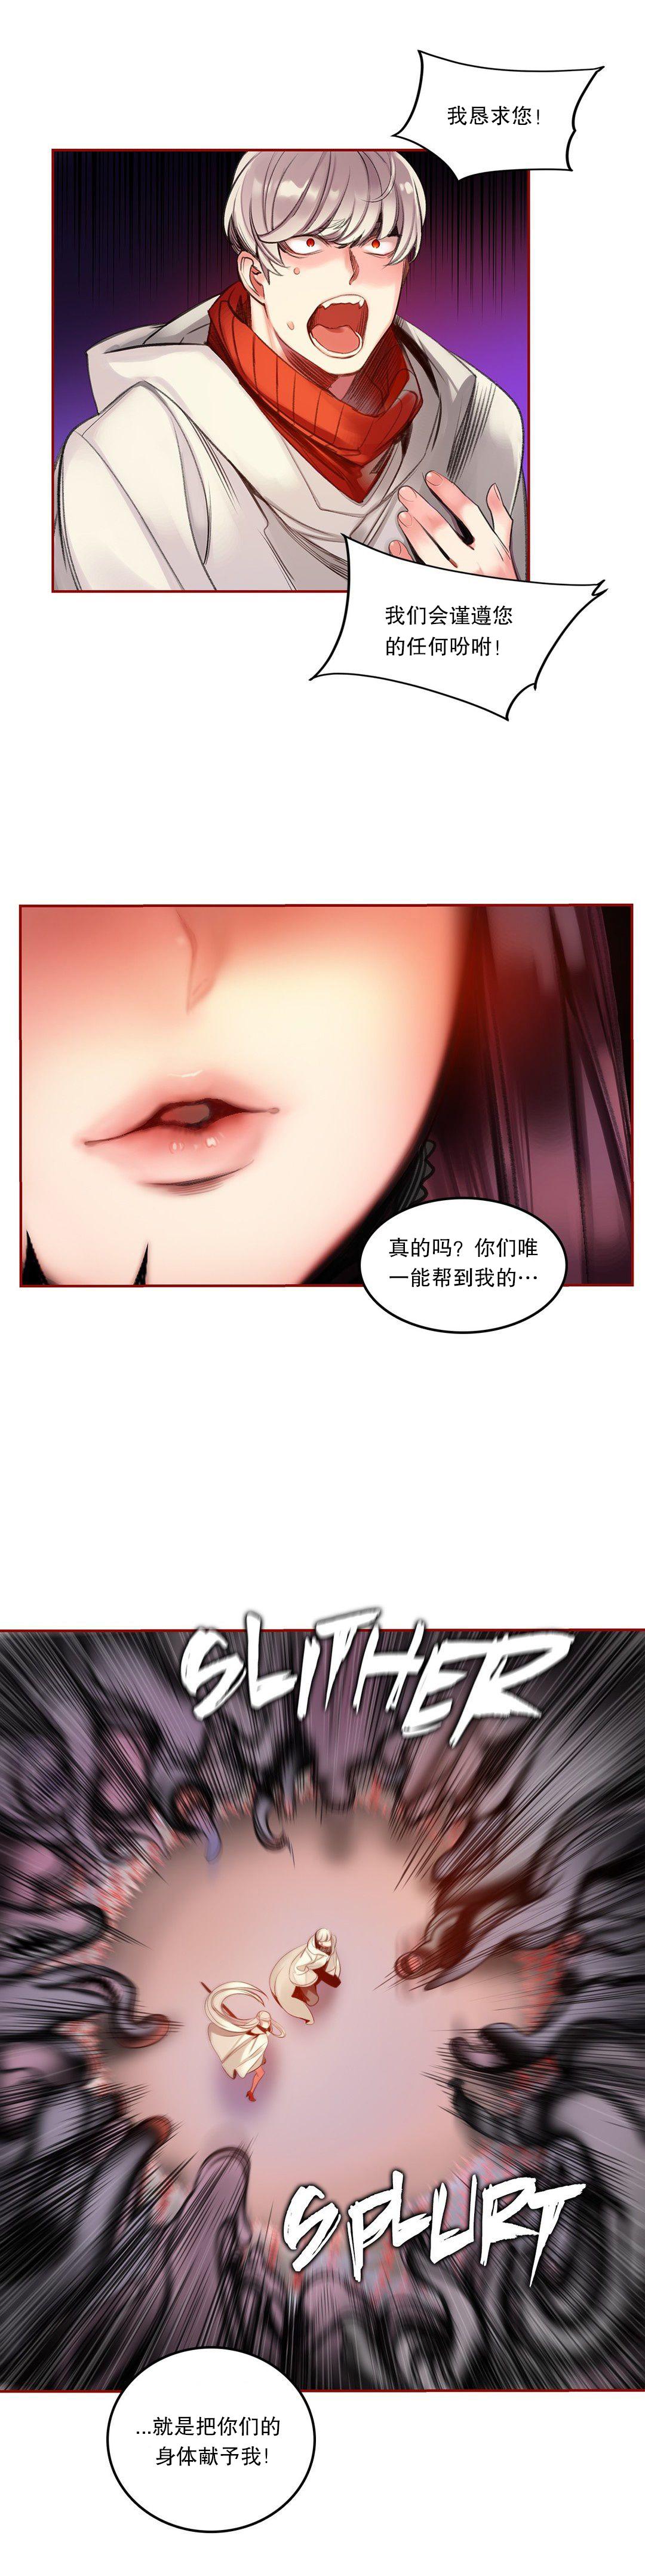 [Juder] Lilith`s Cord (第二季) Ch.61-64 [Chinese] [aaatwist个人汉化] [Ongoing] 86